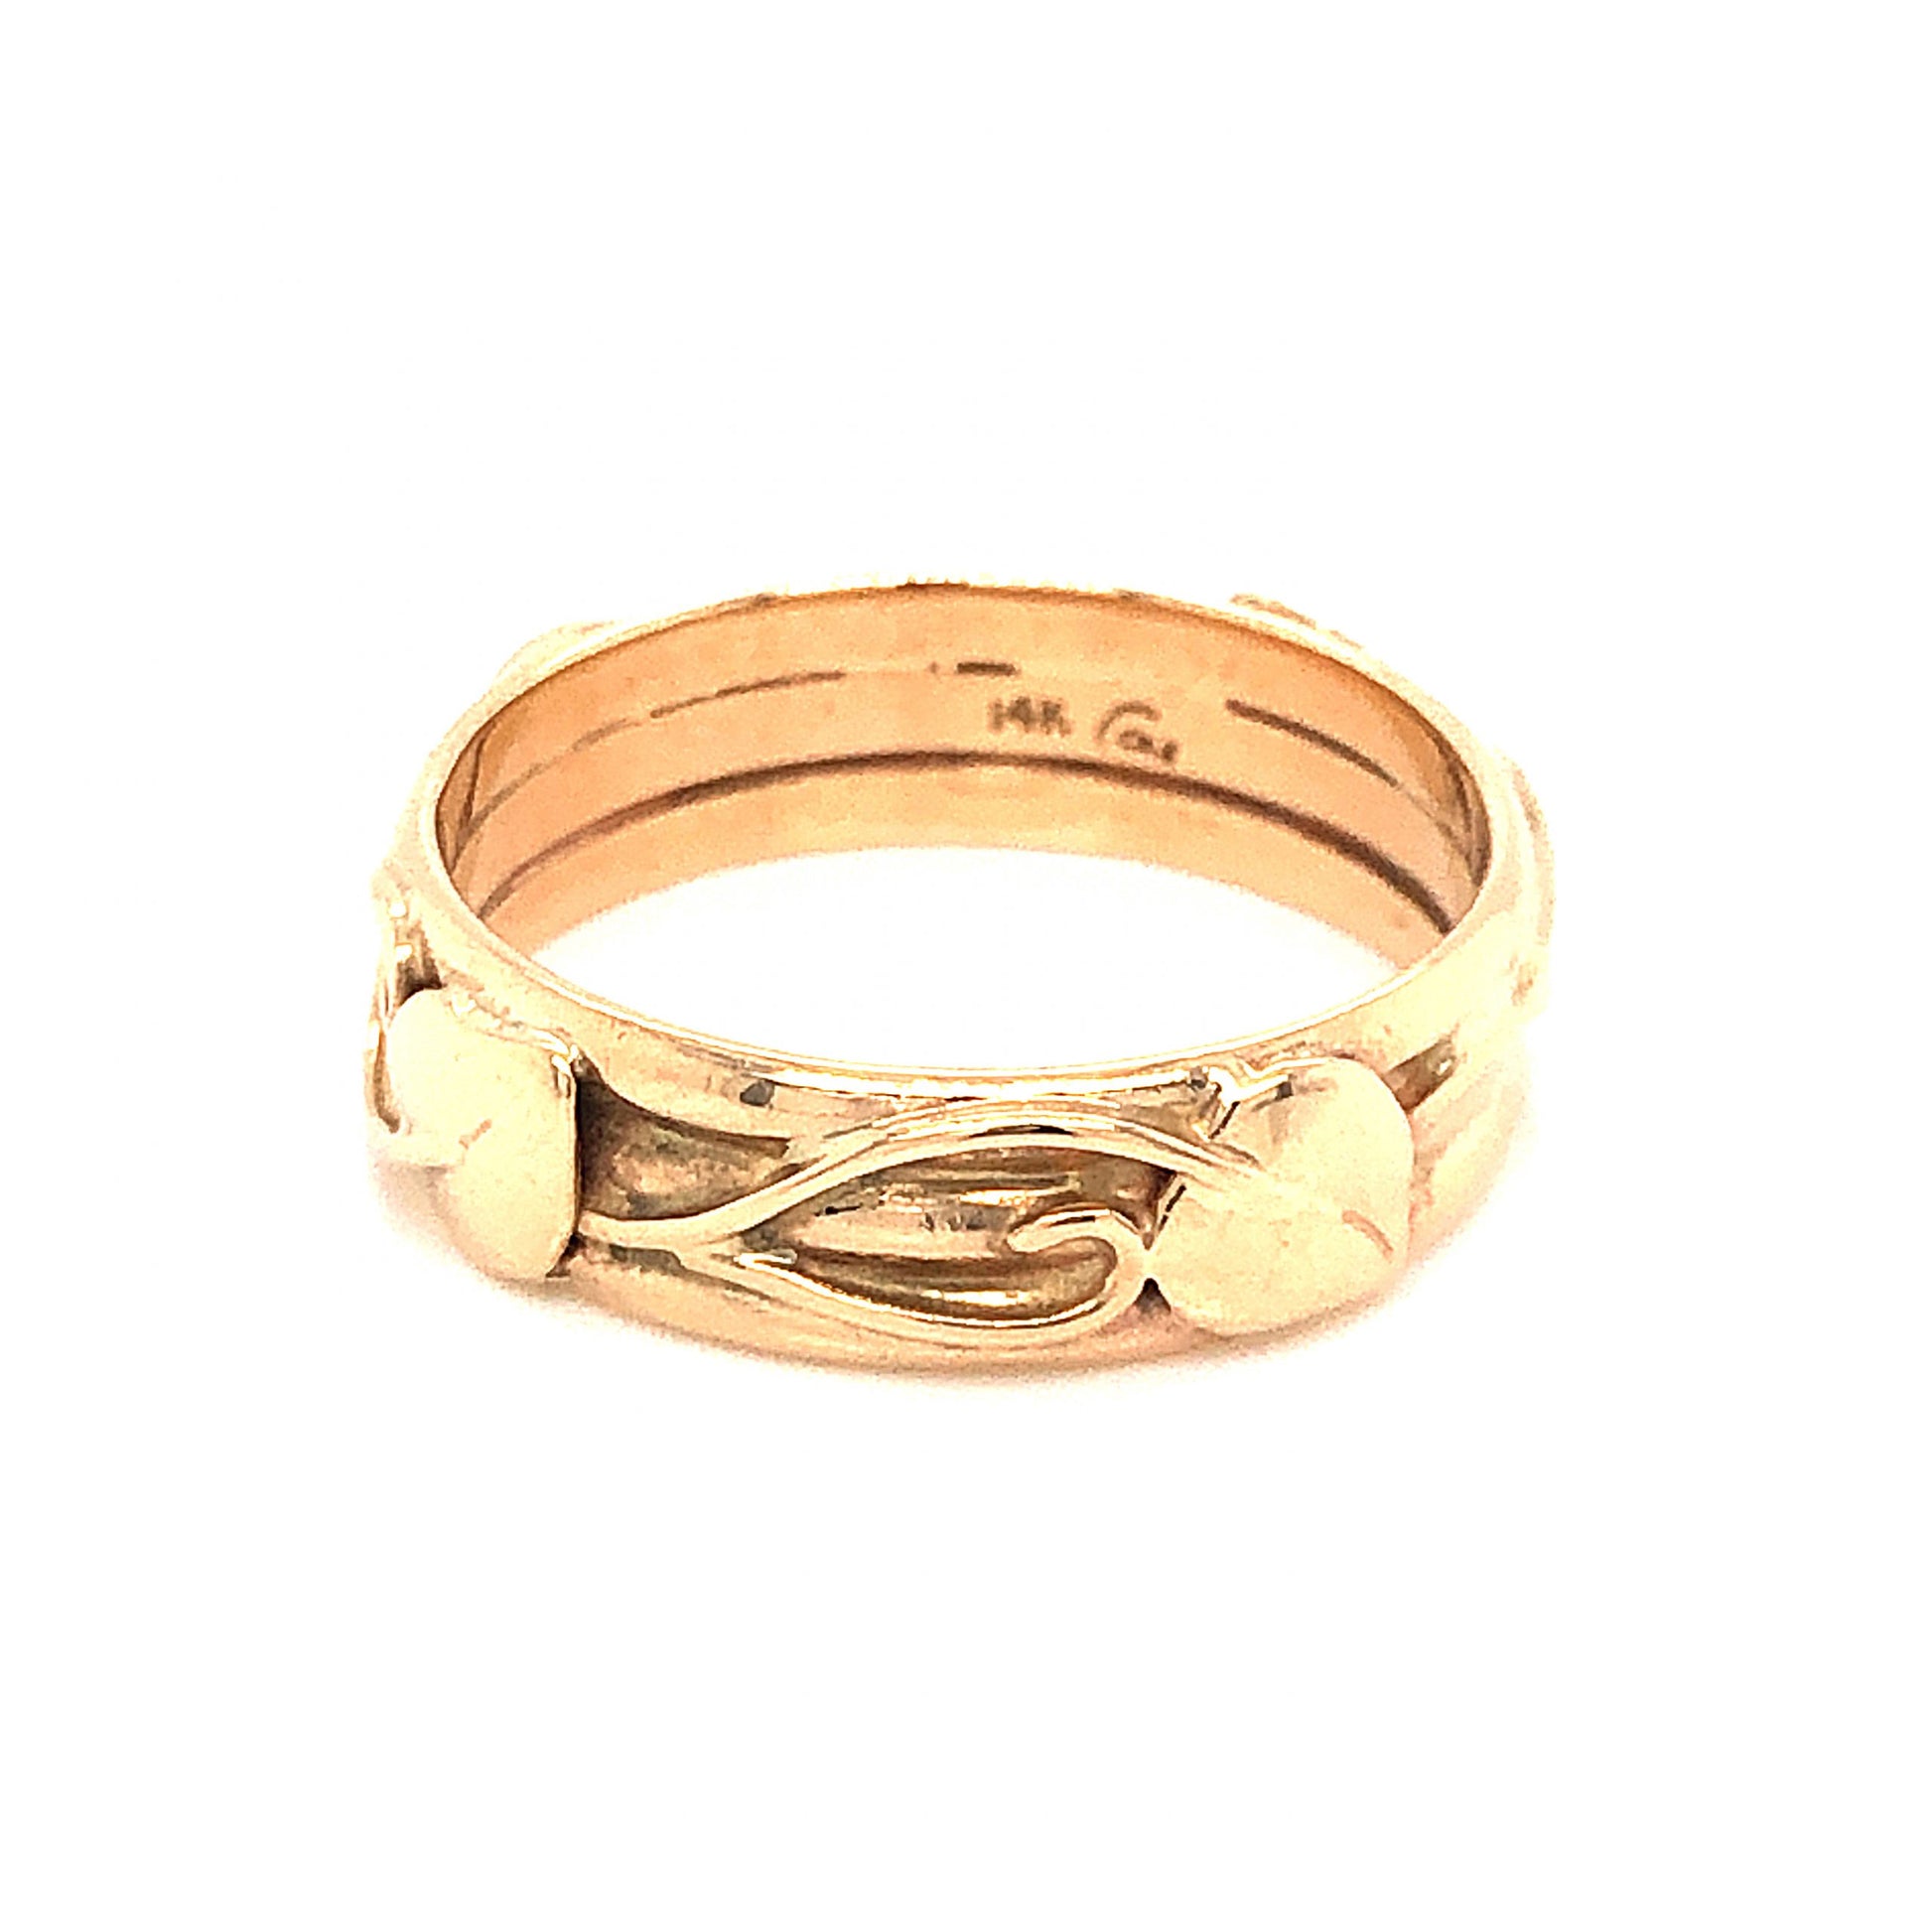 Antique Art Nouveau Wedding Band in 14k Yellow Gold